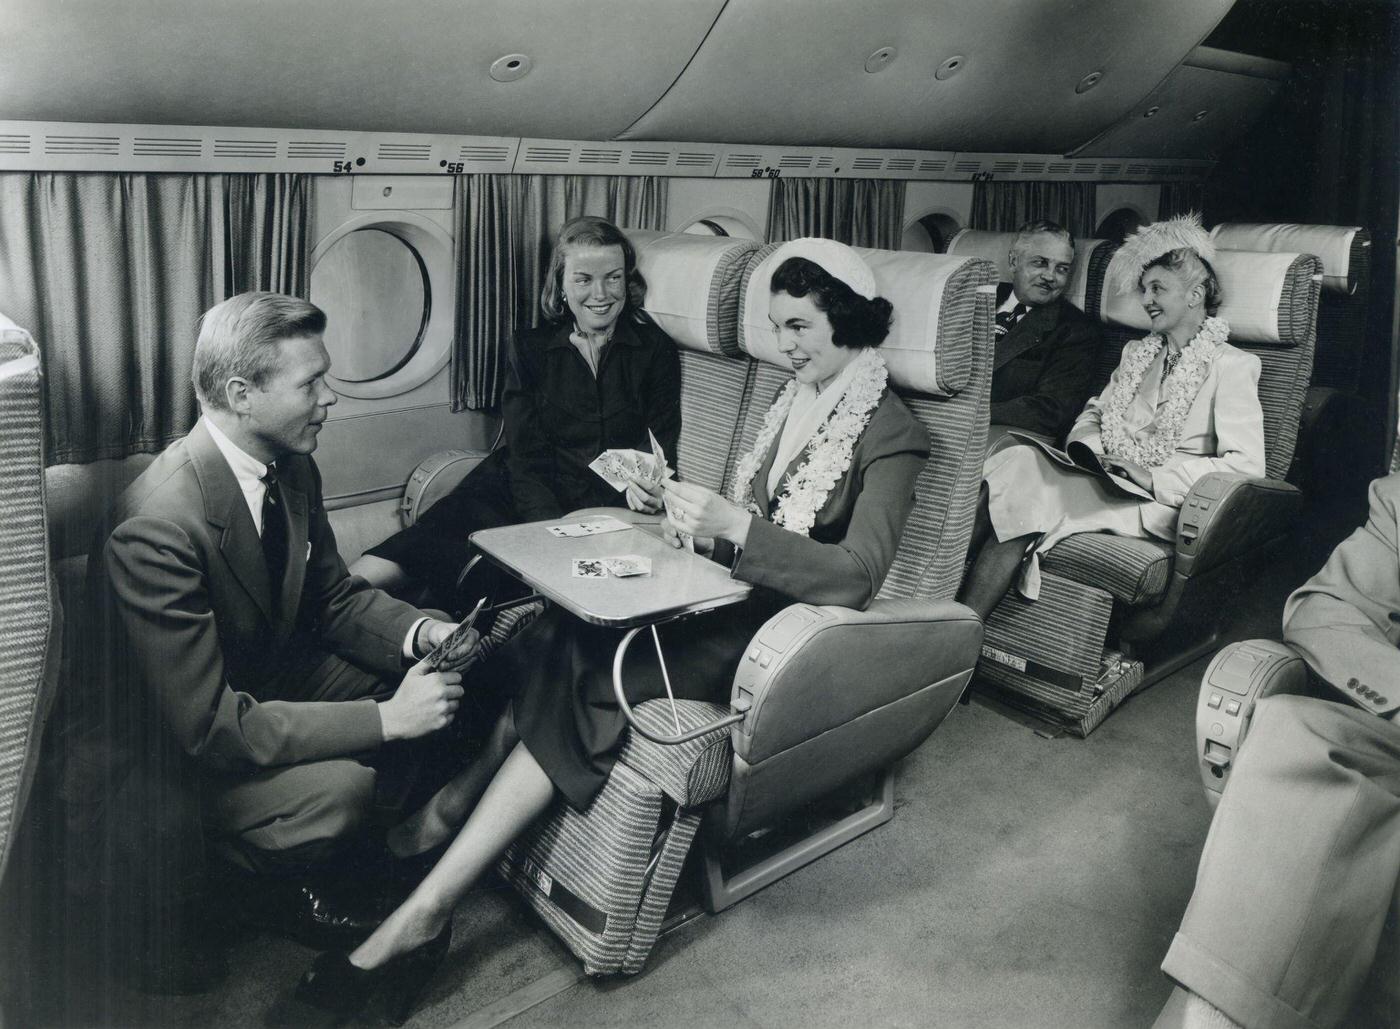 In 1949, in-flight passengers are shown playing cards and making conversation on a spacious airliner.